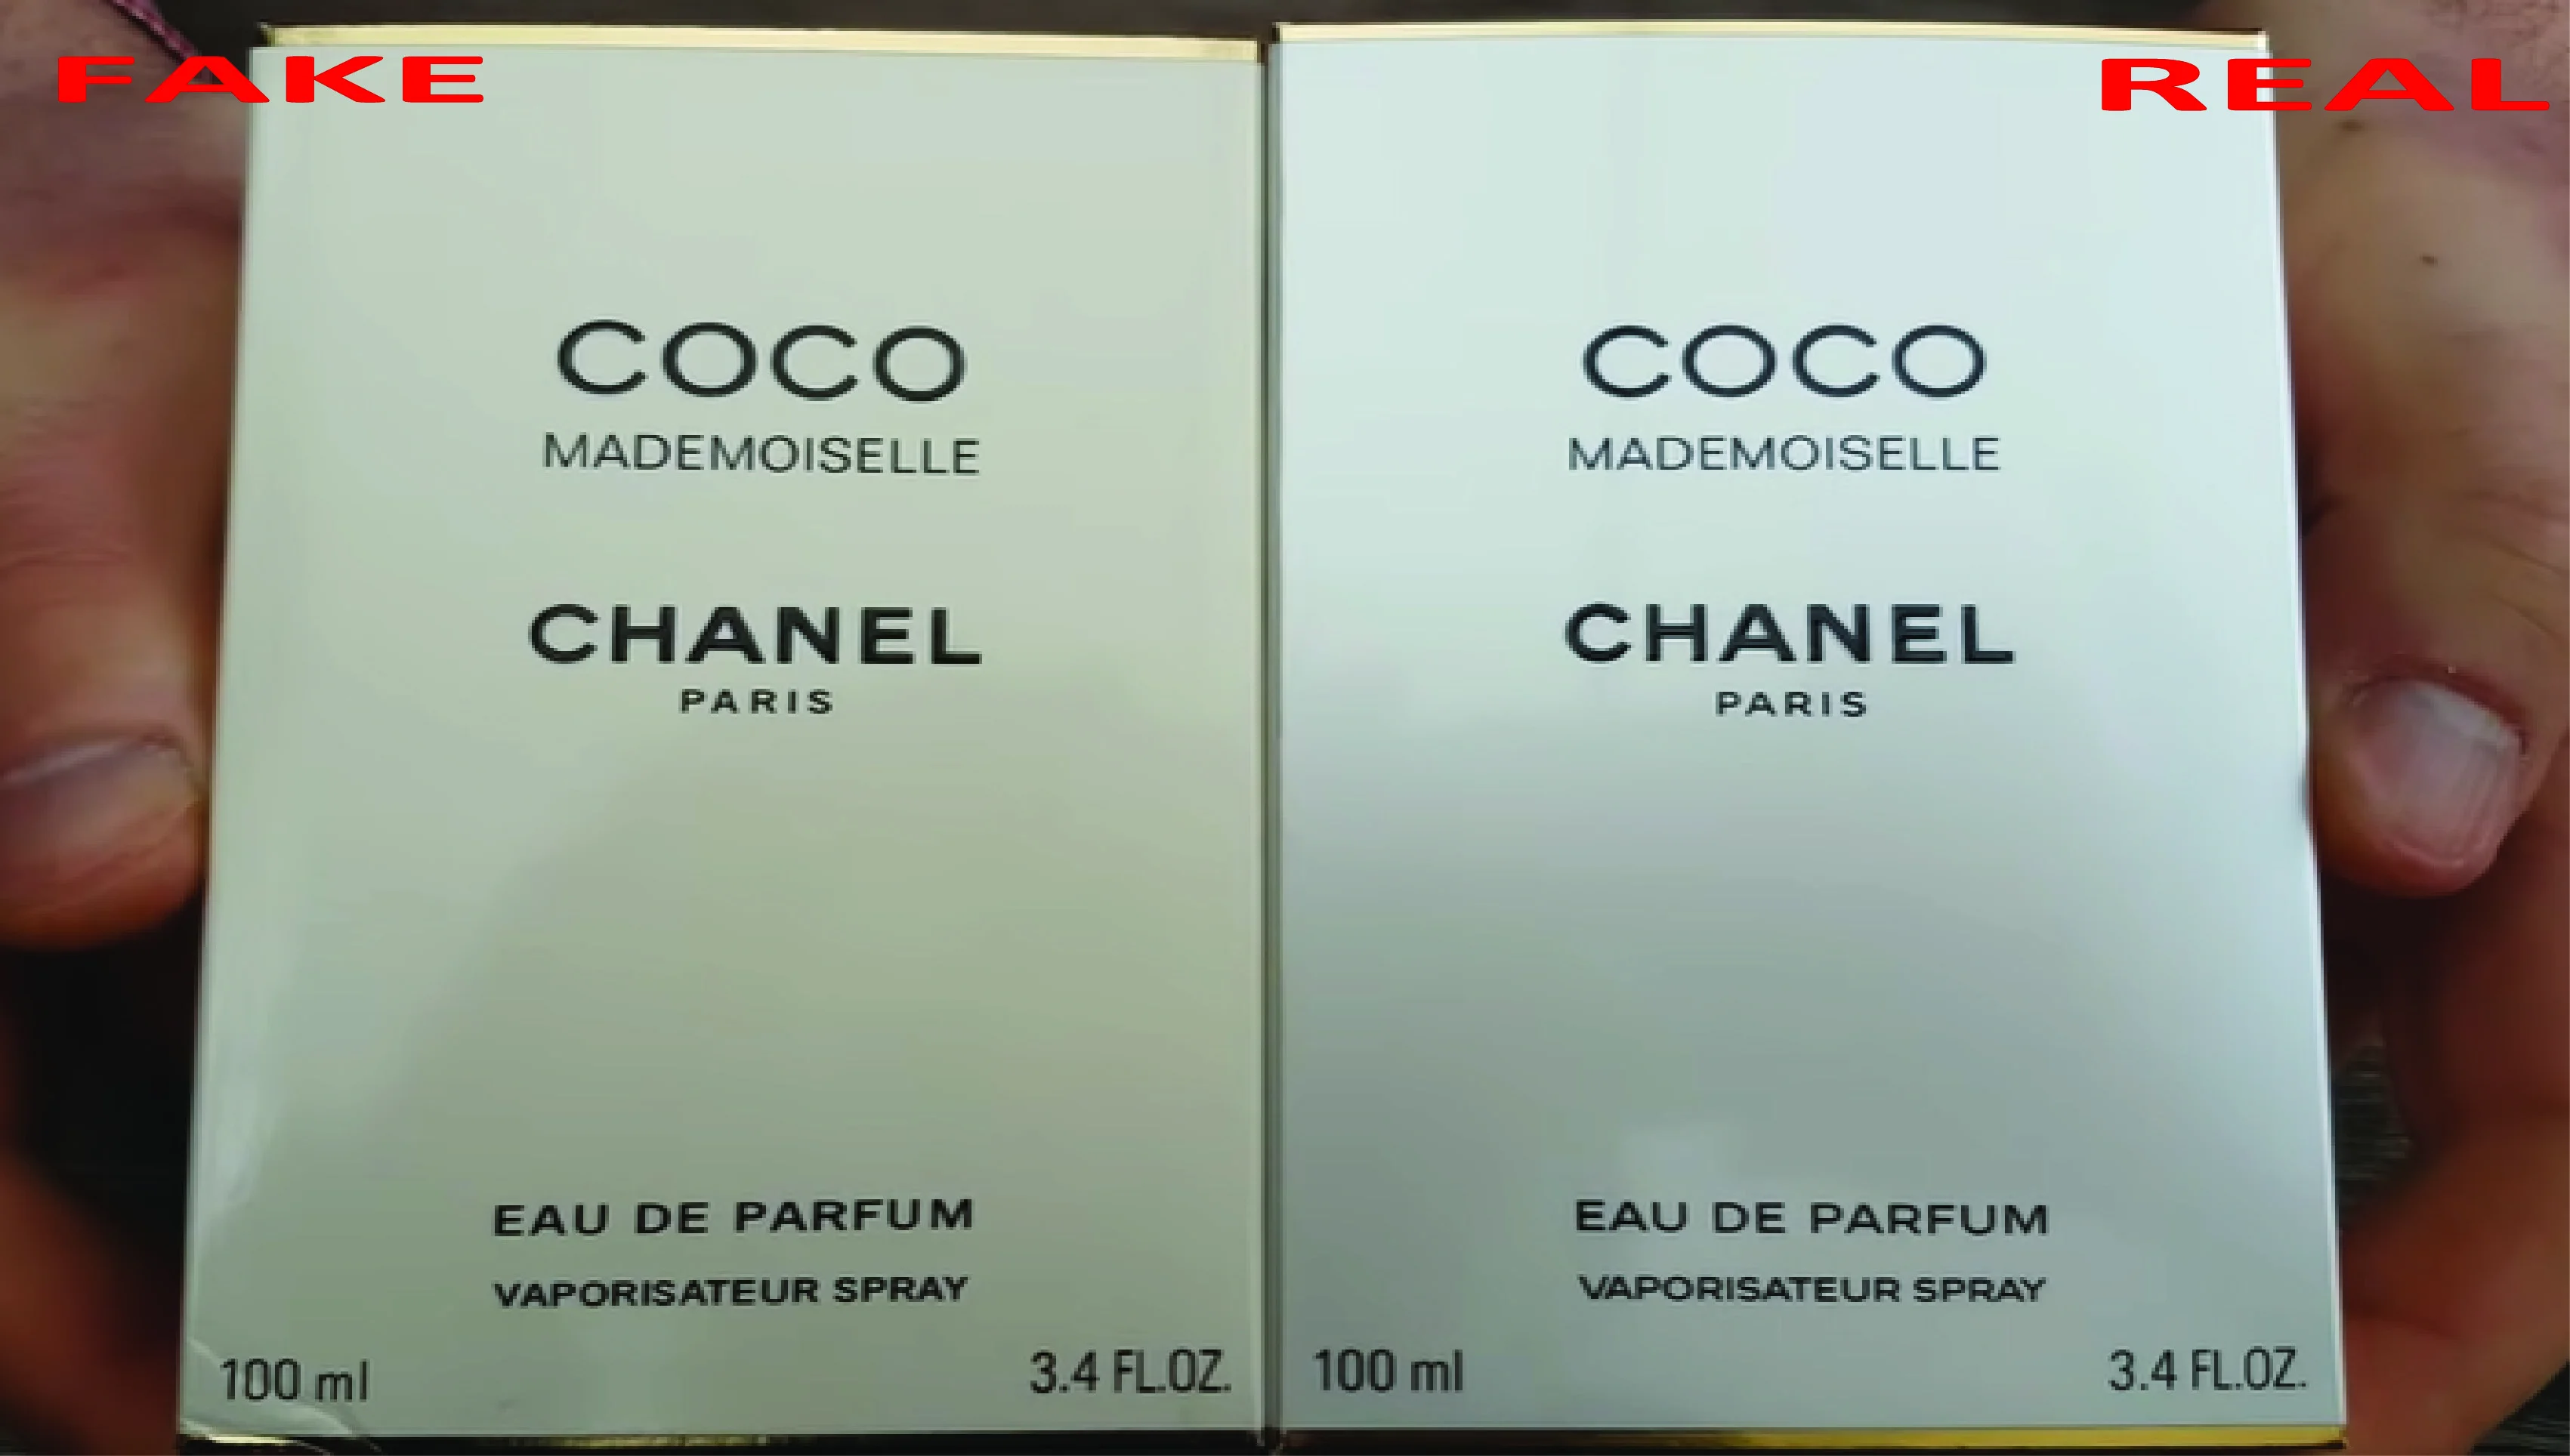 The front packaging of real vs. fake Chanel mademoiselle perfume is shown in this picture. The real one is whitish and the fake seems pale colored